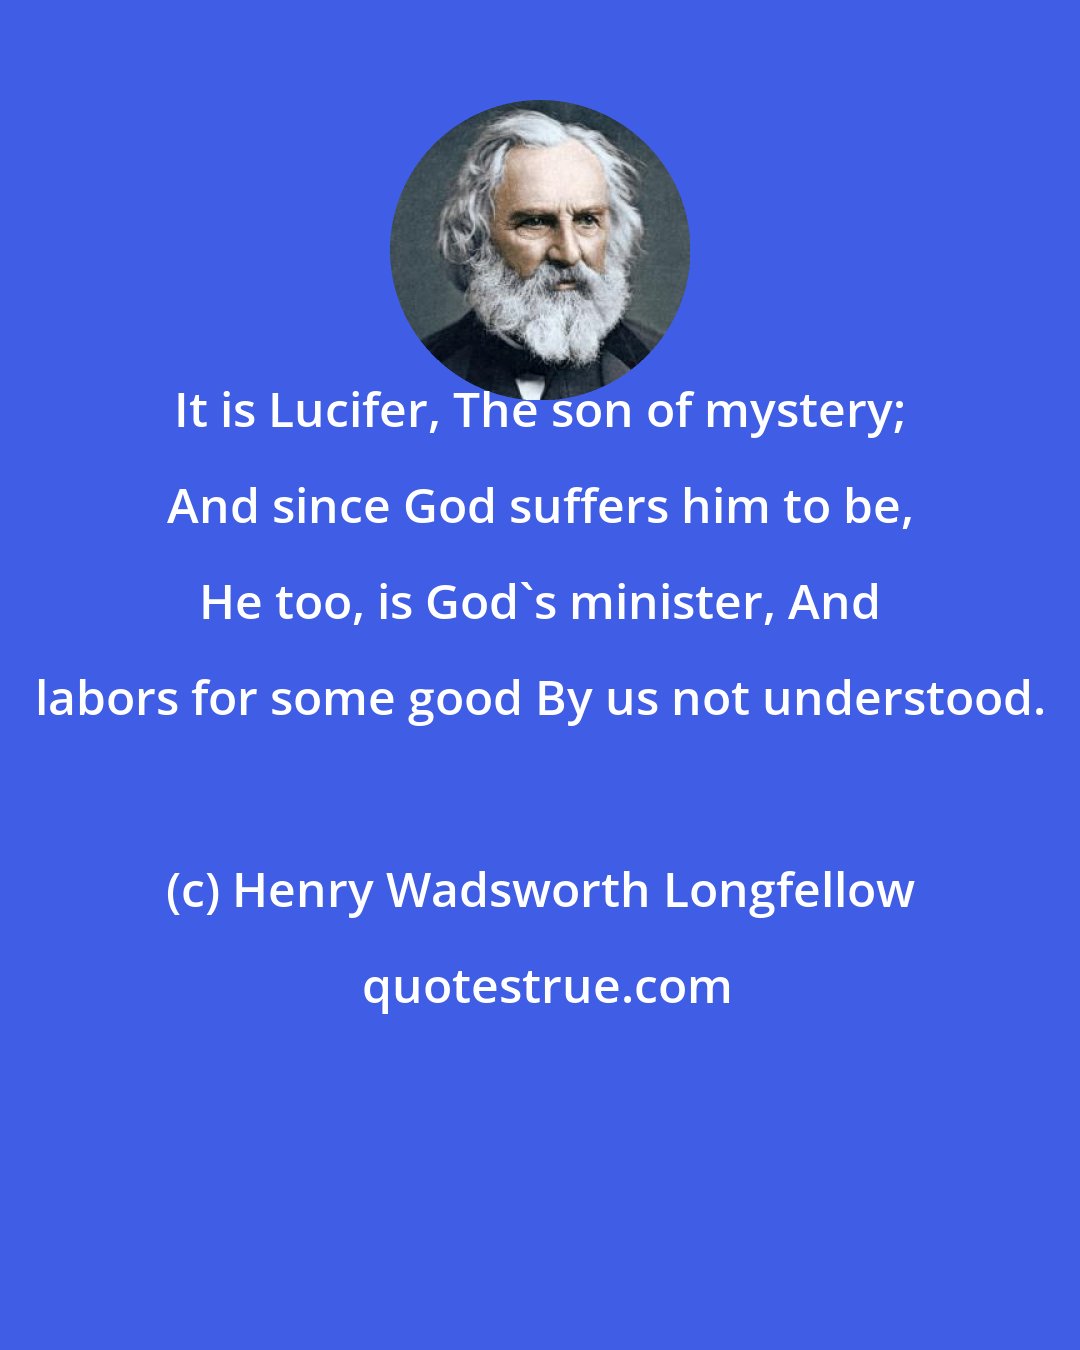 Henry Wadsworth Longfellow: It is Lucifer, The son of mystery; And since God suffers him to be, He too, is God's minister, And labors for some good By us not understood.